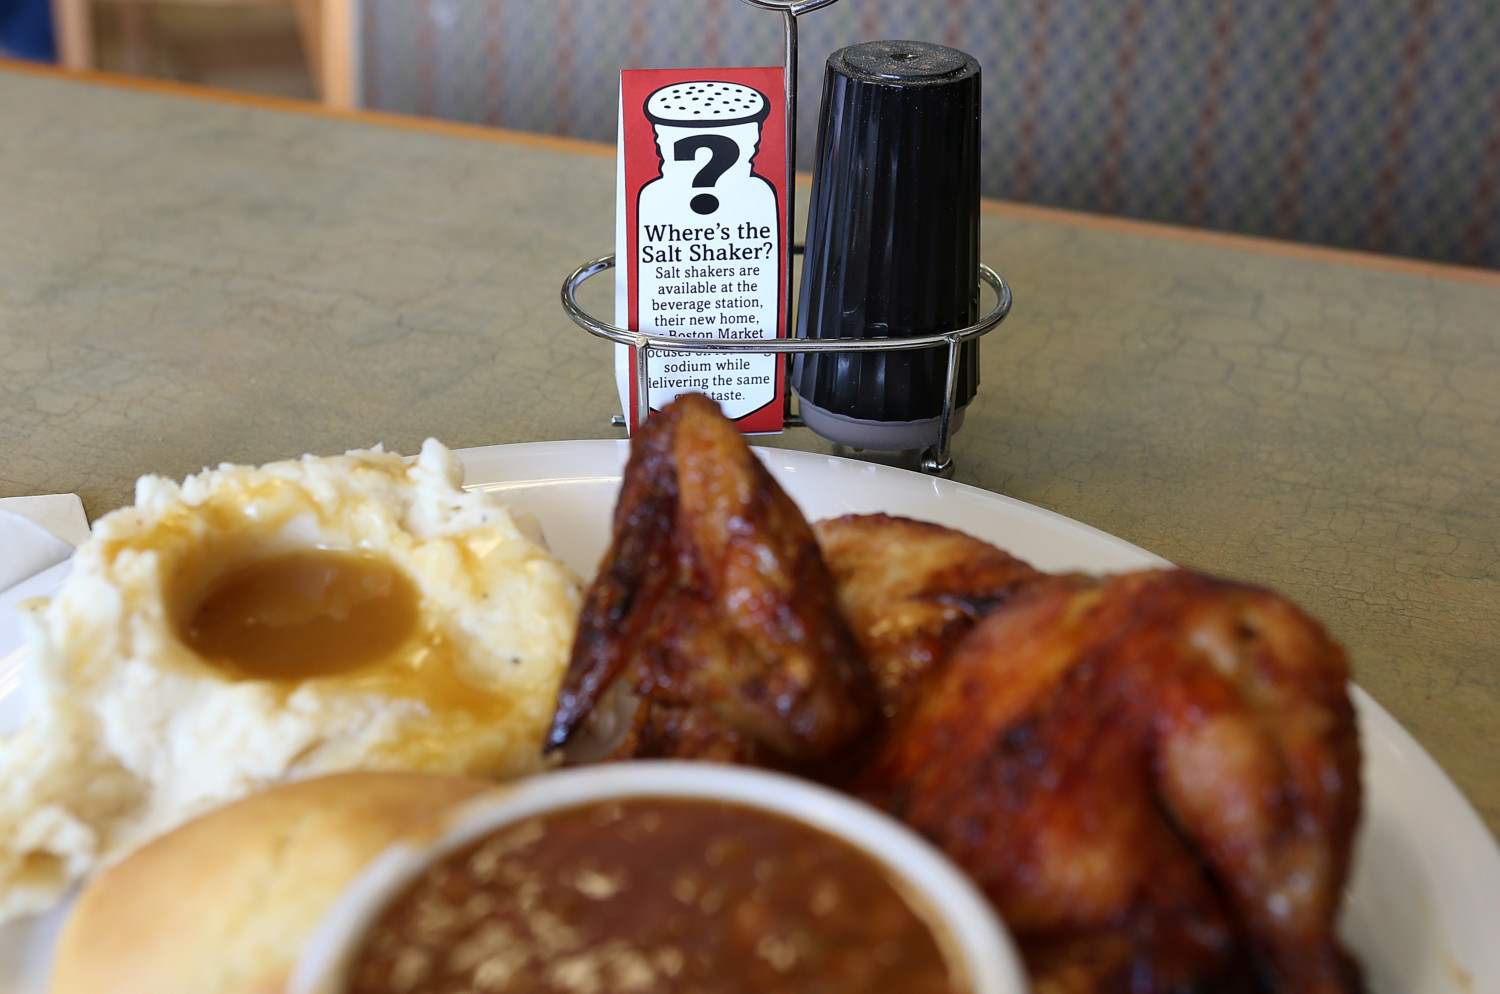 Boston Market To Remove Salt Shakers, Lower Sodium Levels In Food